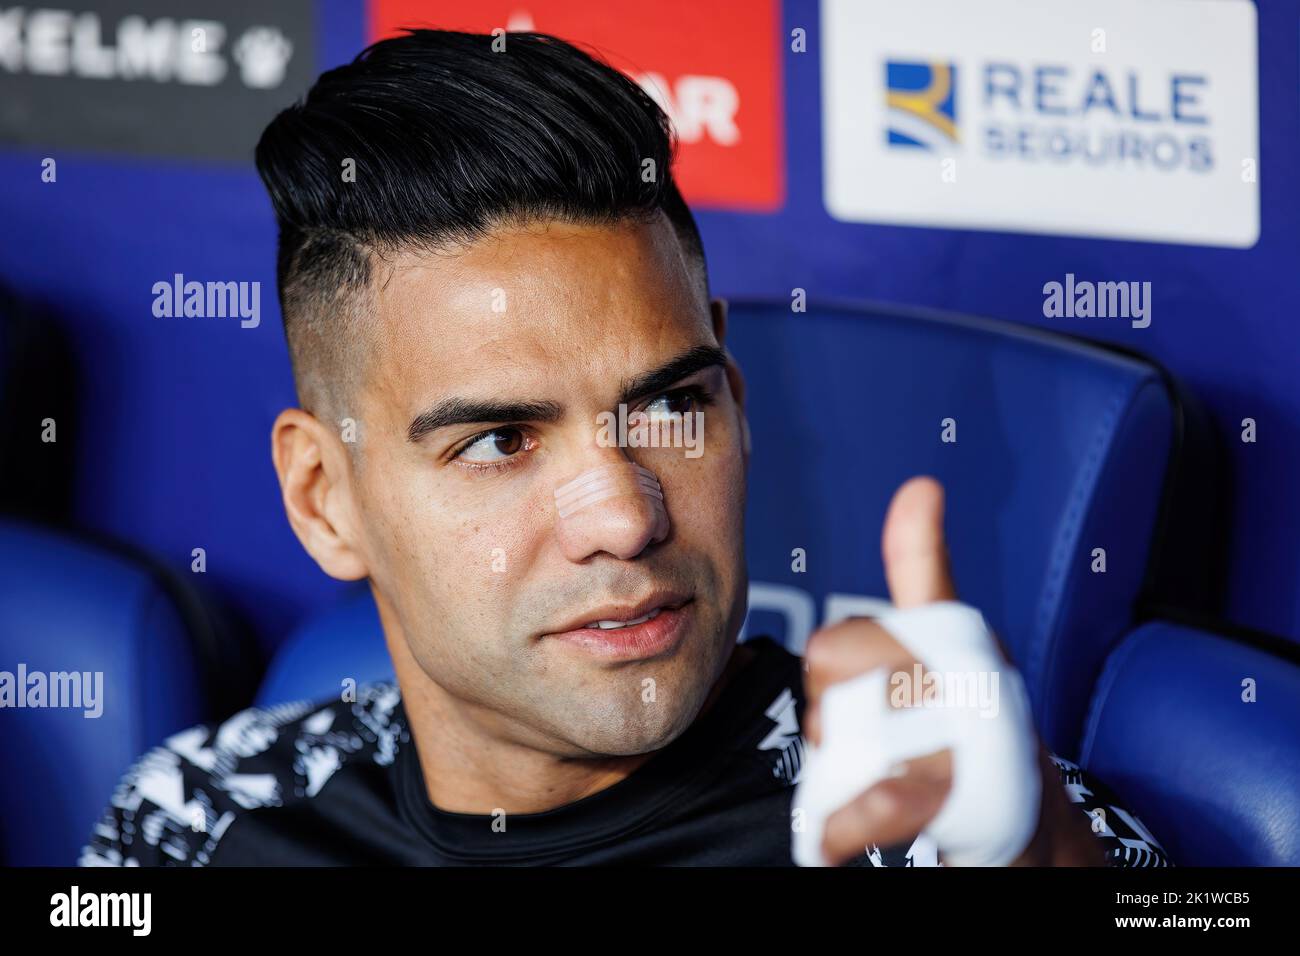 BARCELONA - AUG 19: Radamel Falcao sits on the bench at the La Liga match between RCD Espanyol and Rayo Vallecano at the RCDE Stadium on August 19, 20 Stock Photo